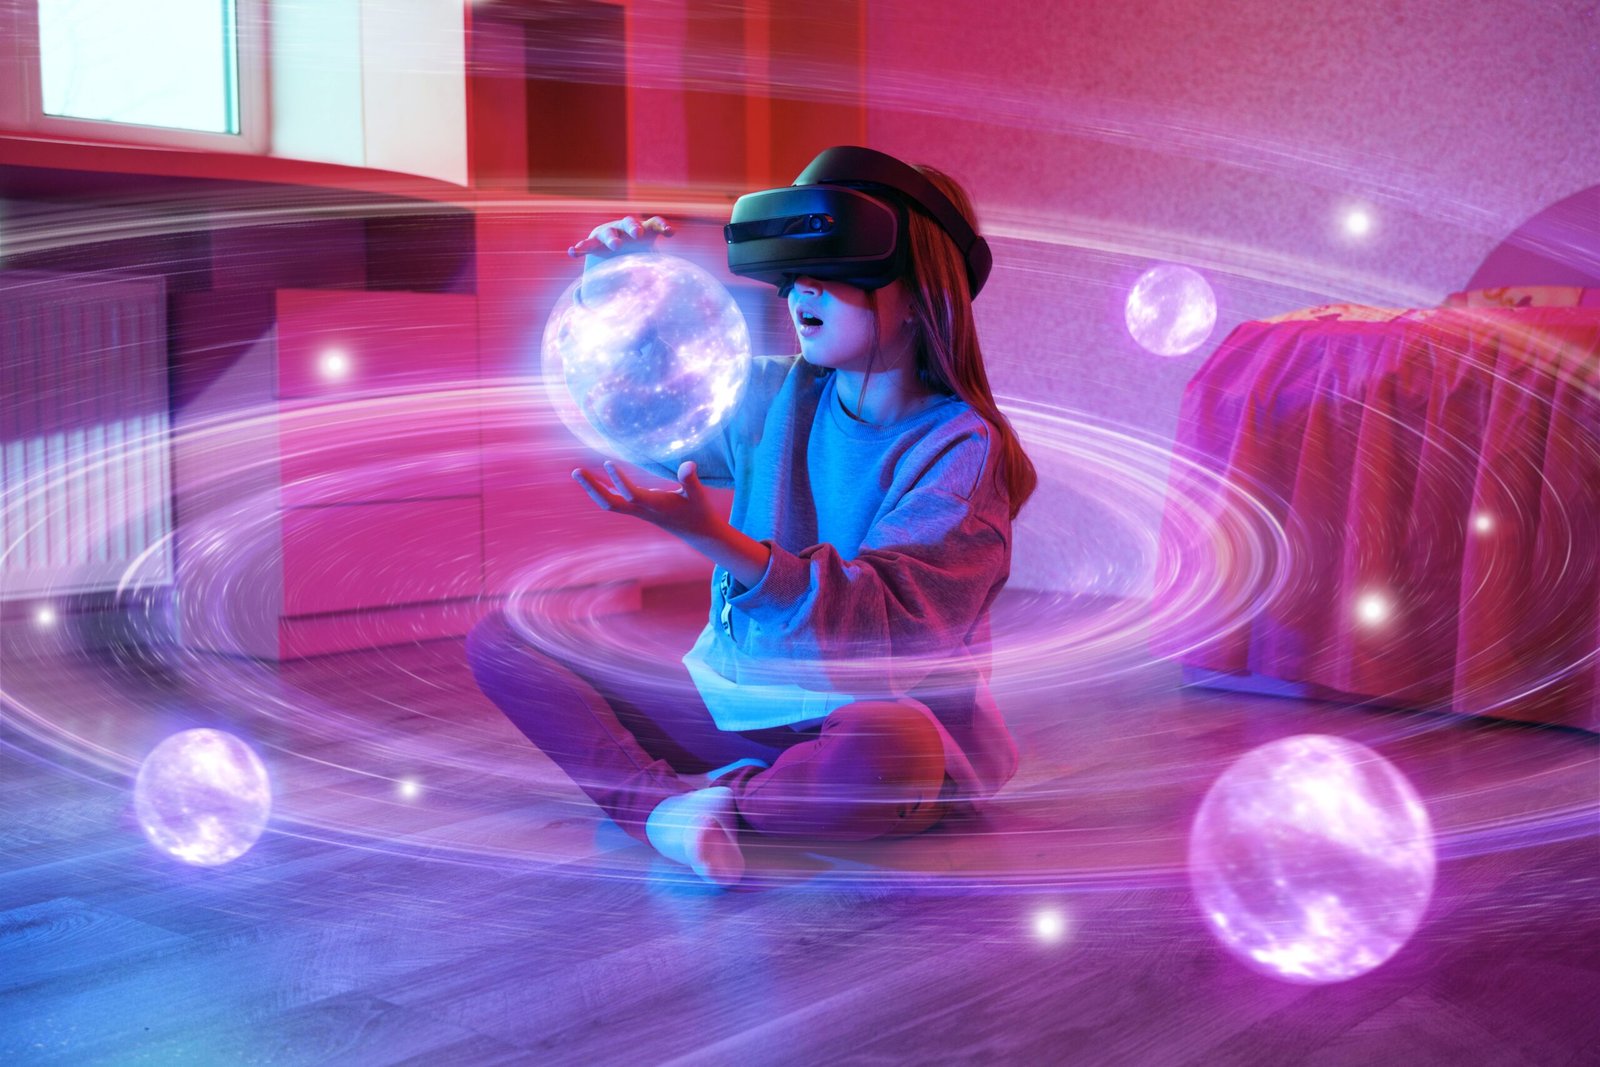 Child,Girl,Wearing,Virtual,Reality,Headset,And,Looking,At,Digital